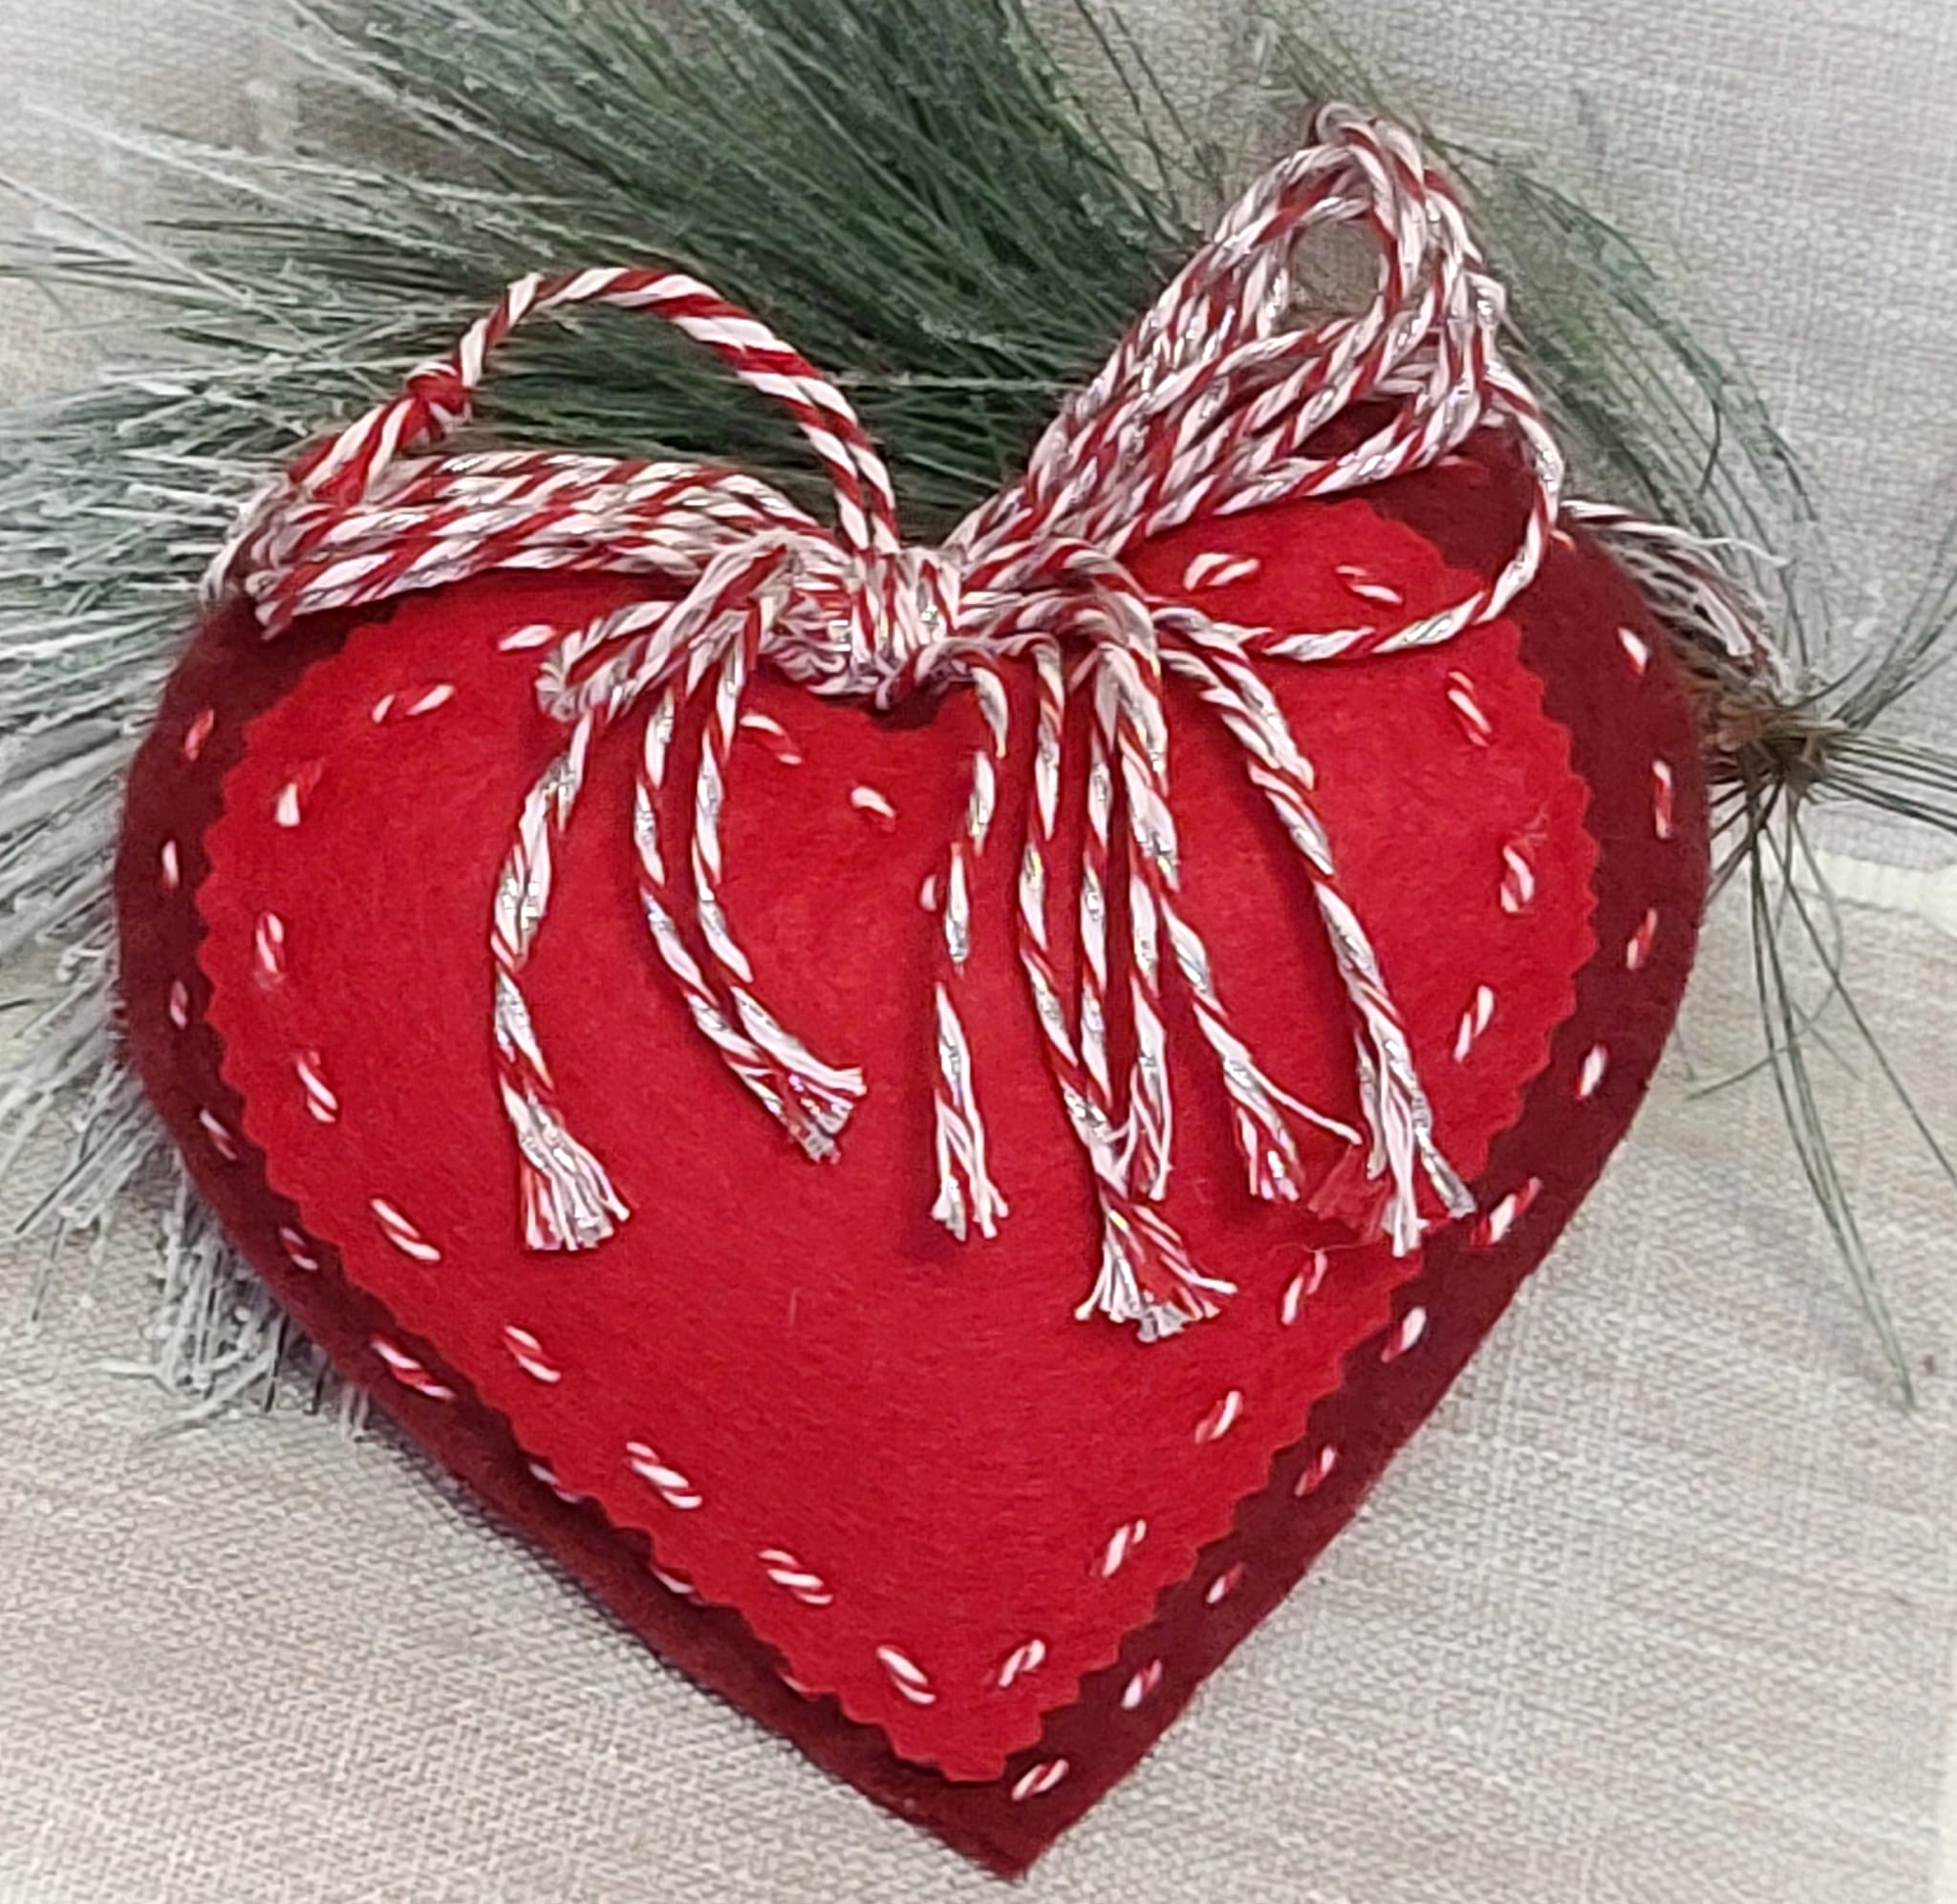 Extra Large red heart ornaments with embroidery candy cane